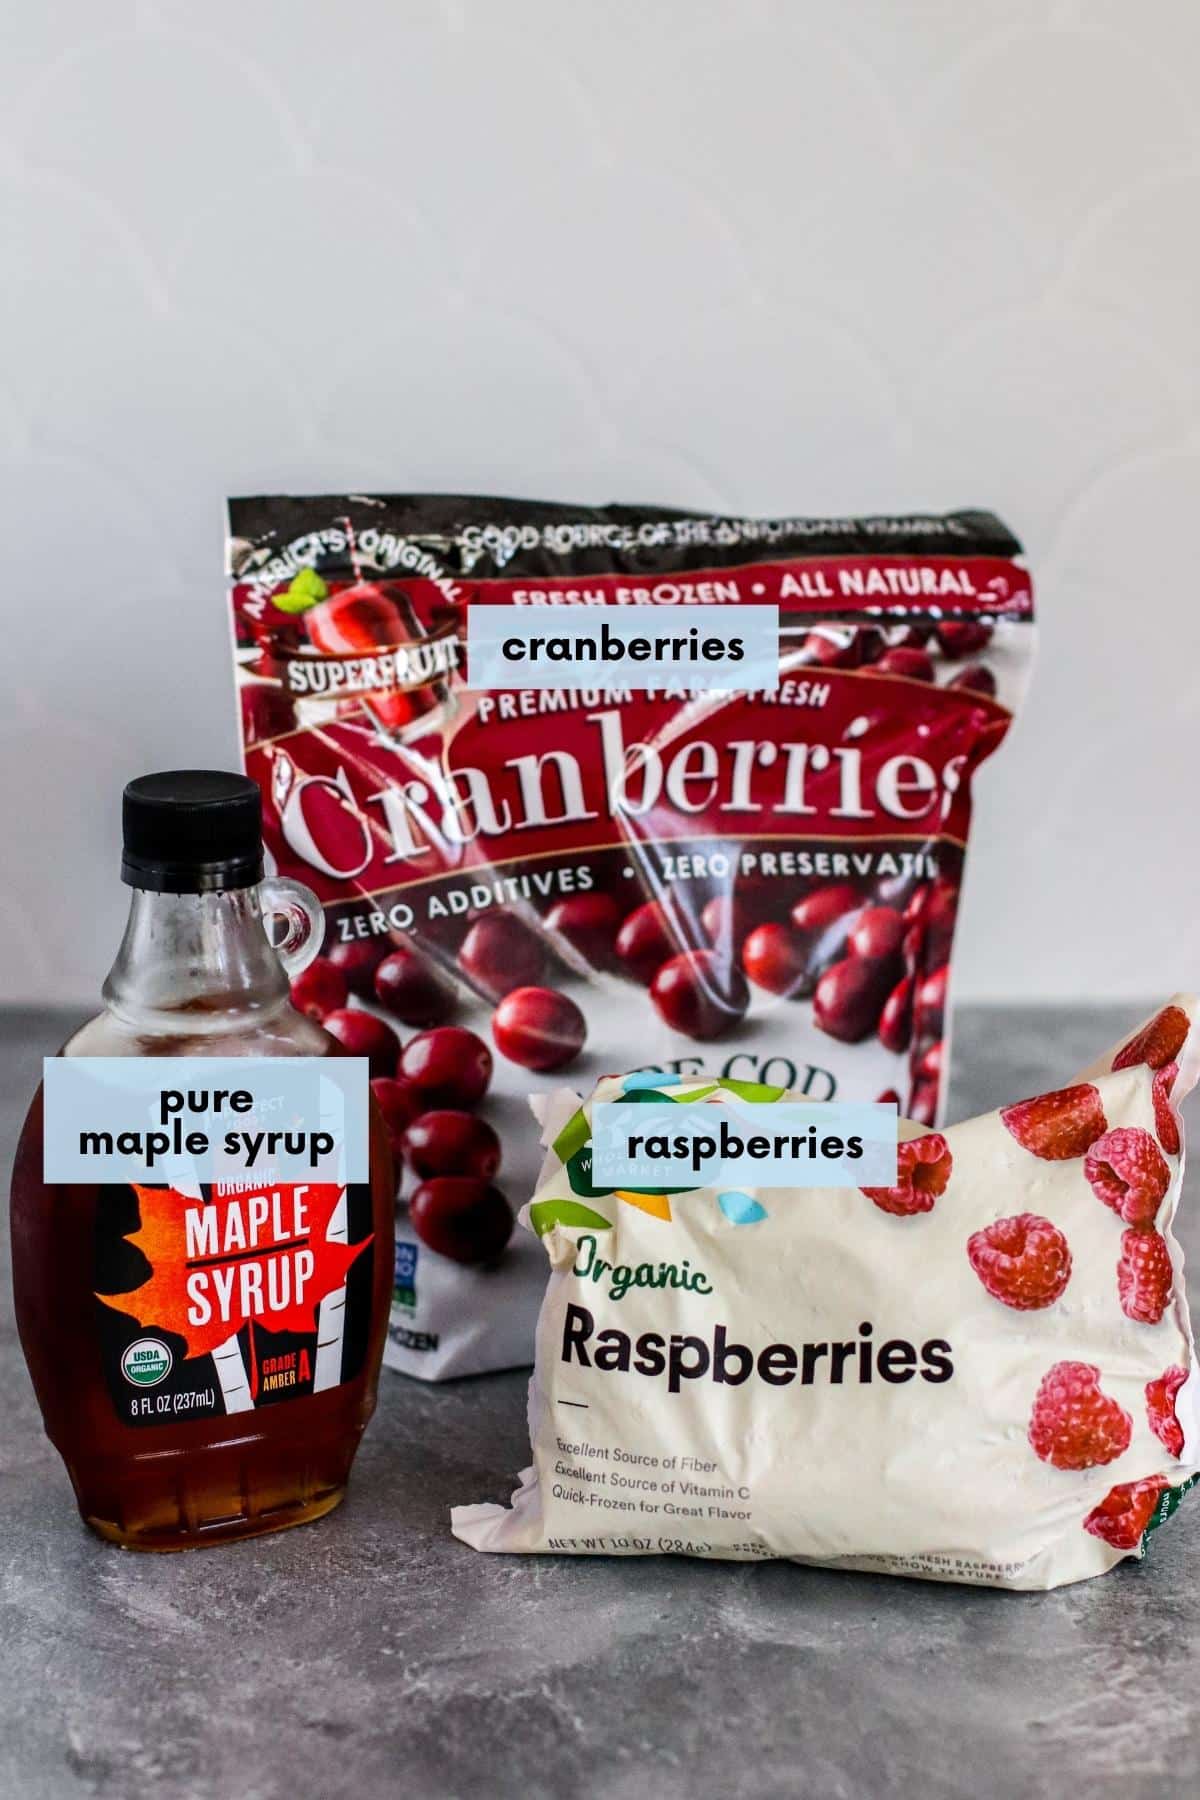 Ingredients on a countertop: Bottle of pure maple syrup, bag of frozen cranberries, and bag of frozen raspberries.